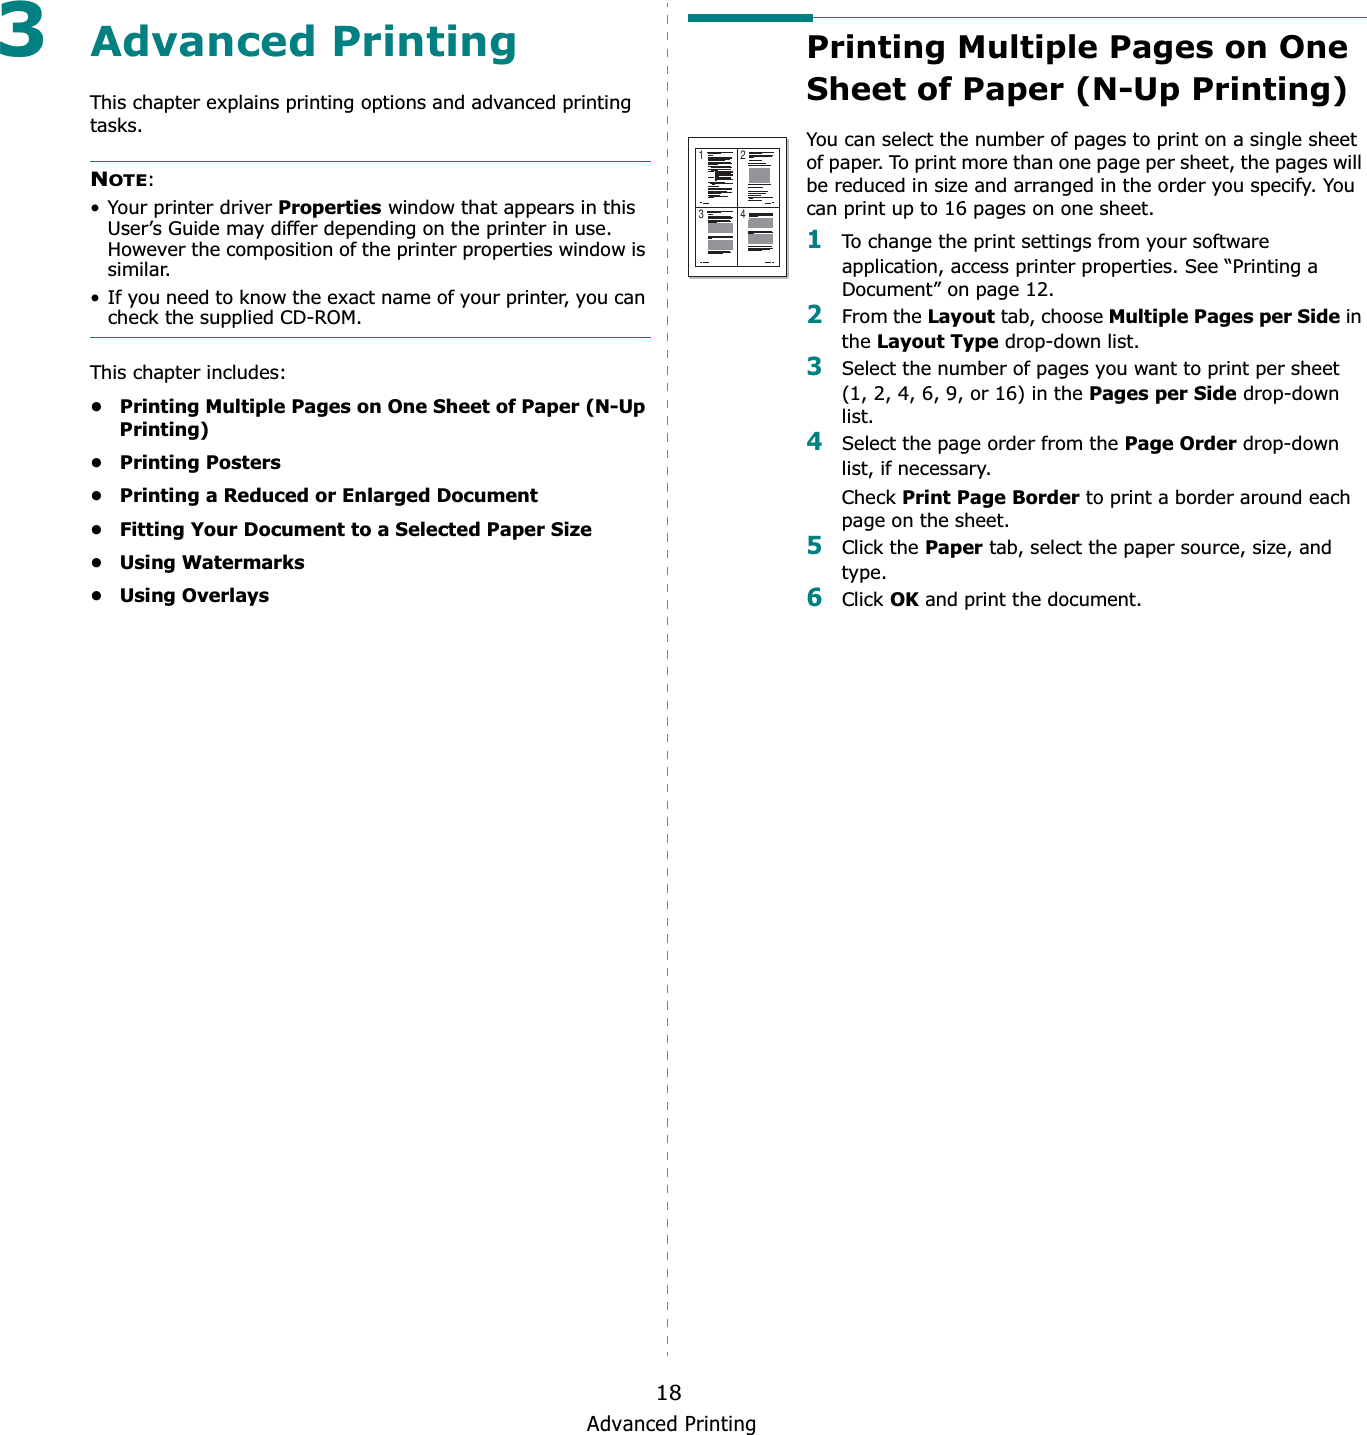 Advanced Printing183Advanced PrintingThis chapter explains printing options and advanced printing tasks. NOTE:• Your printer driver Properties window that appears in this User’s Guide may differ depending on the printer in use. However the composition of the printer properties window is similar.• If you need to know the exact name of your printer, you can check the supplied CD-ROM.This chapter includes:• Printing Multiple Pages on One Sheet of Paper (N-Up Printing)•Printing Posters• Printing a Reduced or Enlarged Document• Fitting Your Document to a Selected Paper Size•Using Watermarks•Using OverlaysPrinting Multiple Pages on One Sheet of Paper (N-Up Printing) You can select the number of pages to print on a single sheet of paper. To print more than one page per sheet, the pages will be reduced in size and arranged in the order you specify. You can print up to 16 pages on one sheet.  1To change the print settings from your software application, access printer properties. See “Printing a Document” on page 12.2From the Layout tab, choose Multiple Pages per Side in the Layout Type drop-down list. 3Select the number of pages you want to print per sheet (1, 2, 4, 6, 9, or 16) in the Pages per Side drop-down list.4Select the page order from the Page Order drop-down list, if necessary.Check Print Page Border to print a border around each page on the sheet. 5Click the Paper tab, select the paper source, size, and type.6Click OK and print the document. 1 23 4